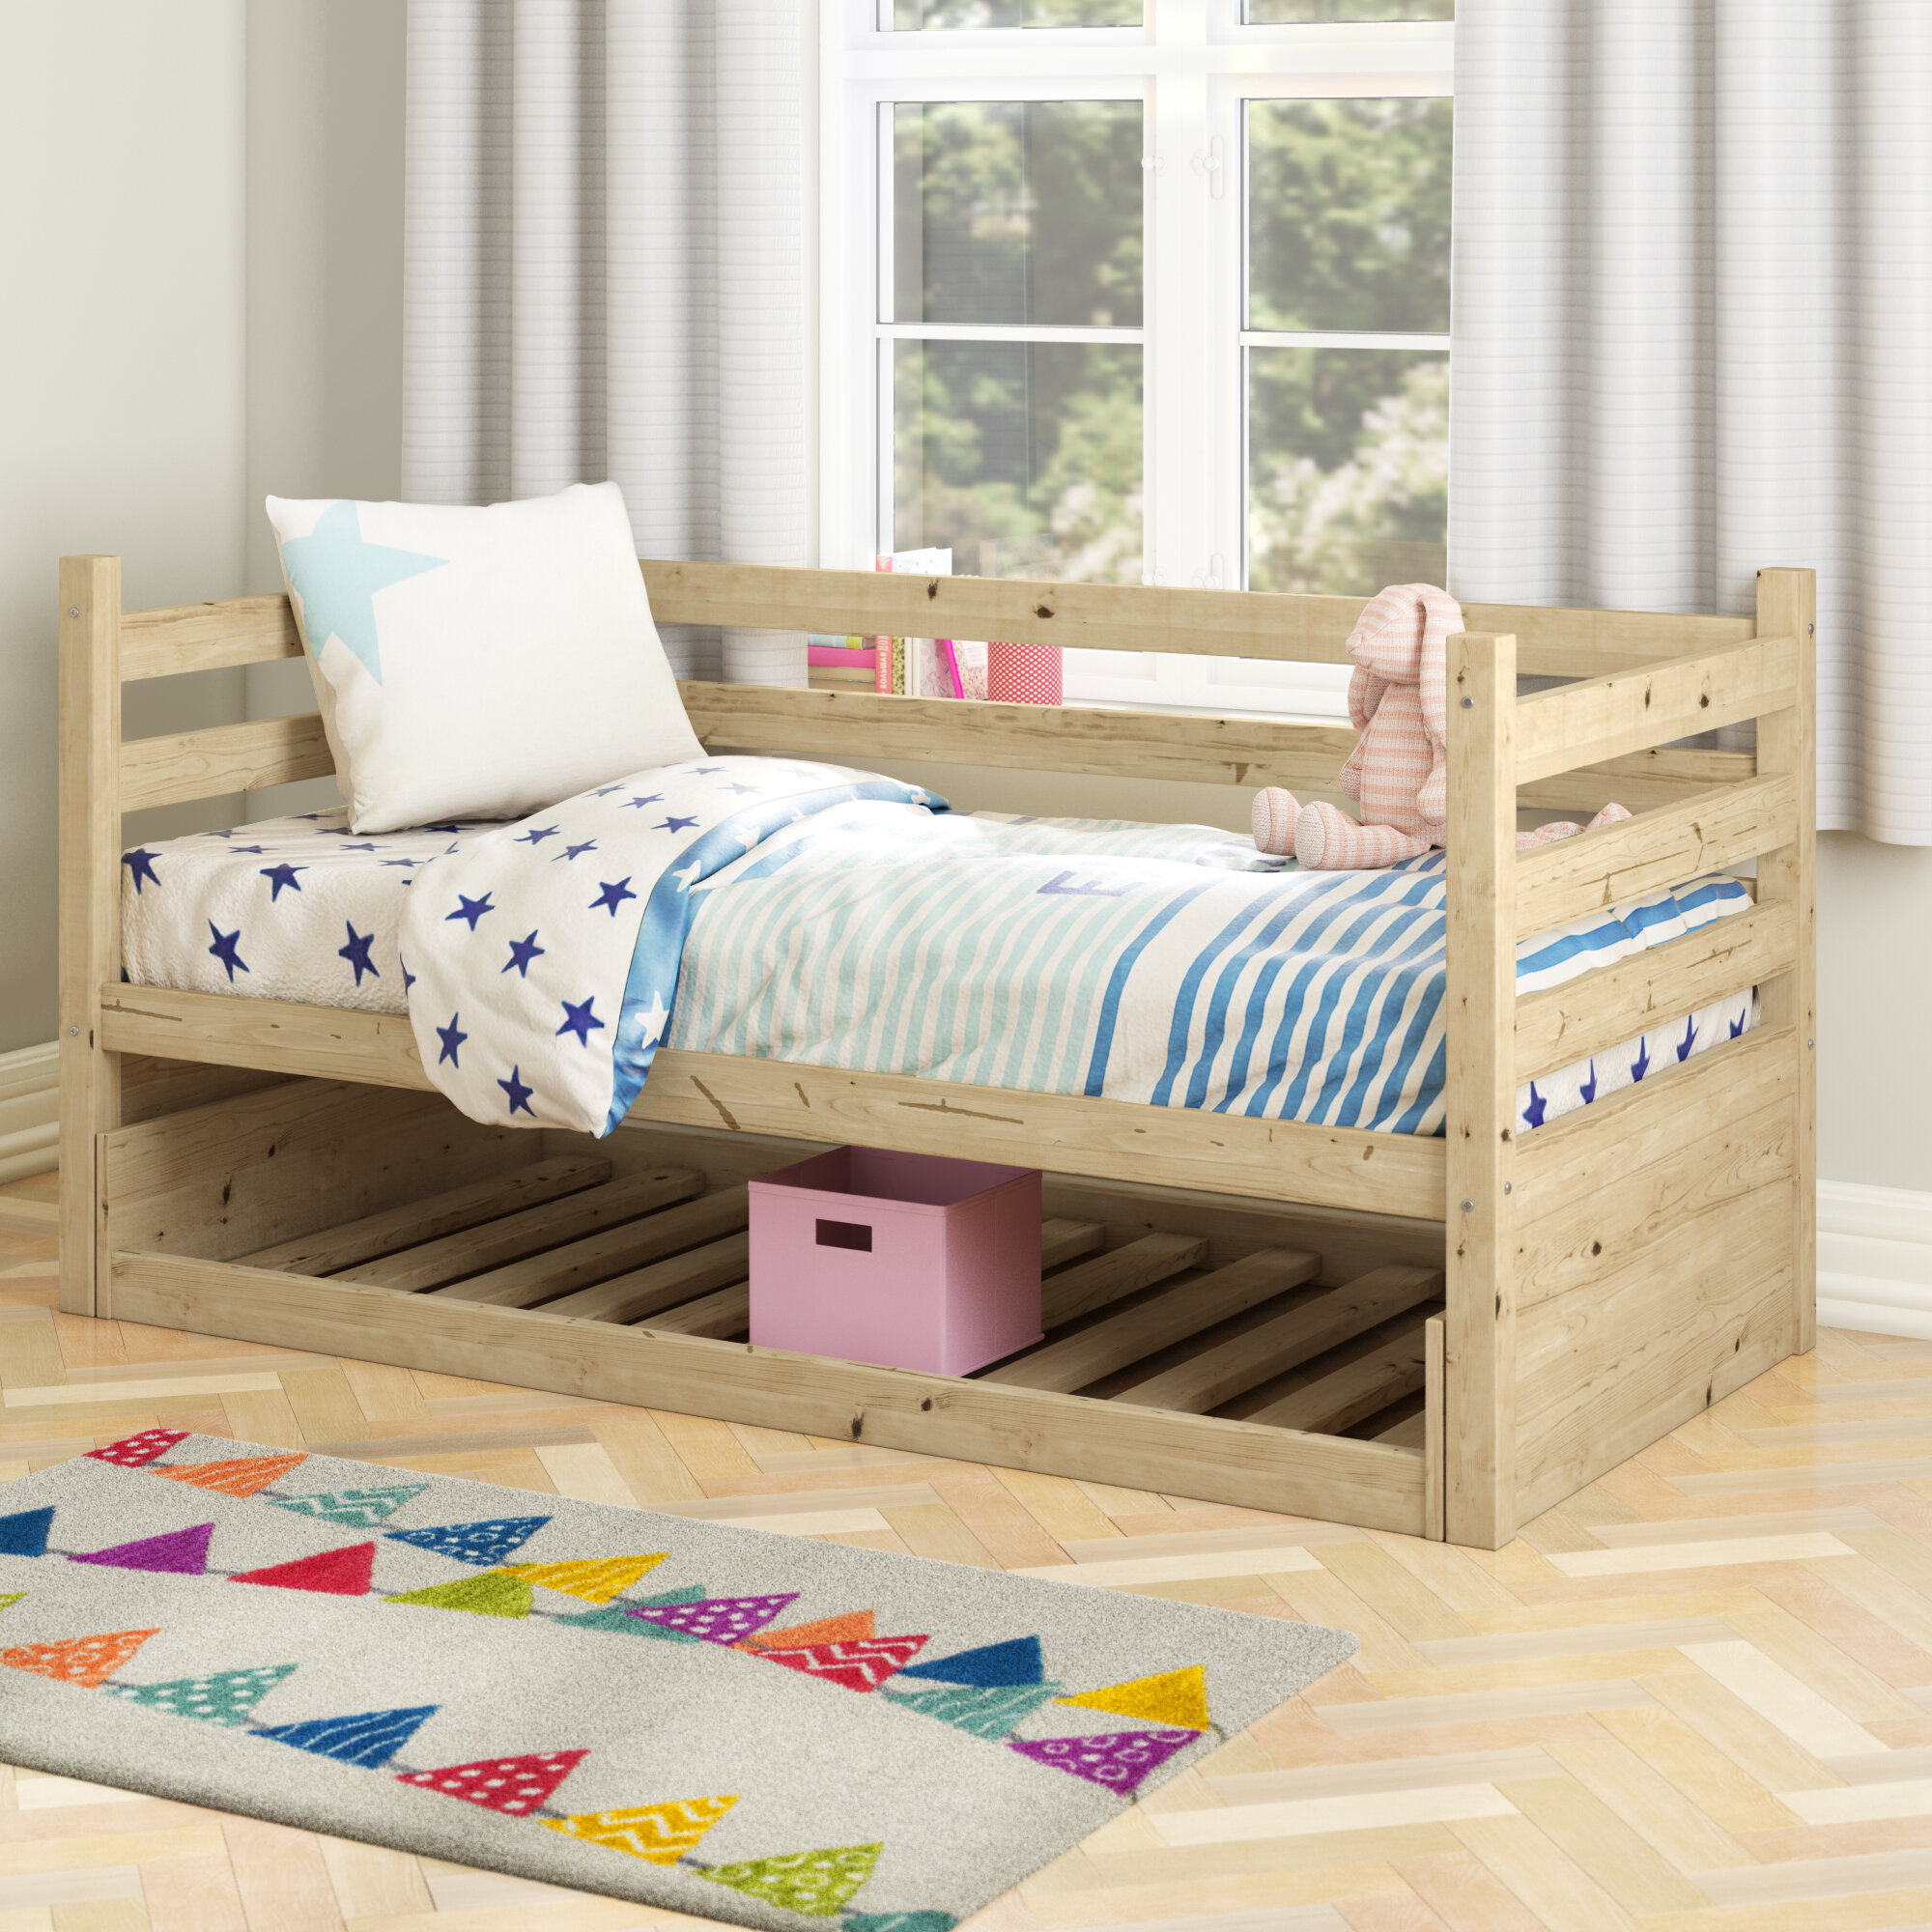 Natur Pur Daybed Reviews Wayfair Co Uk